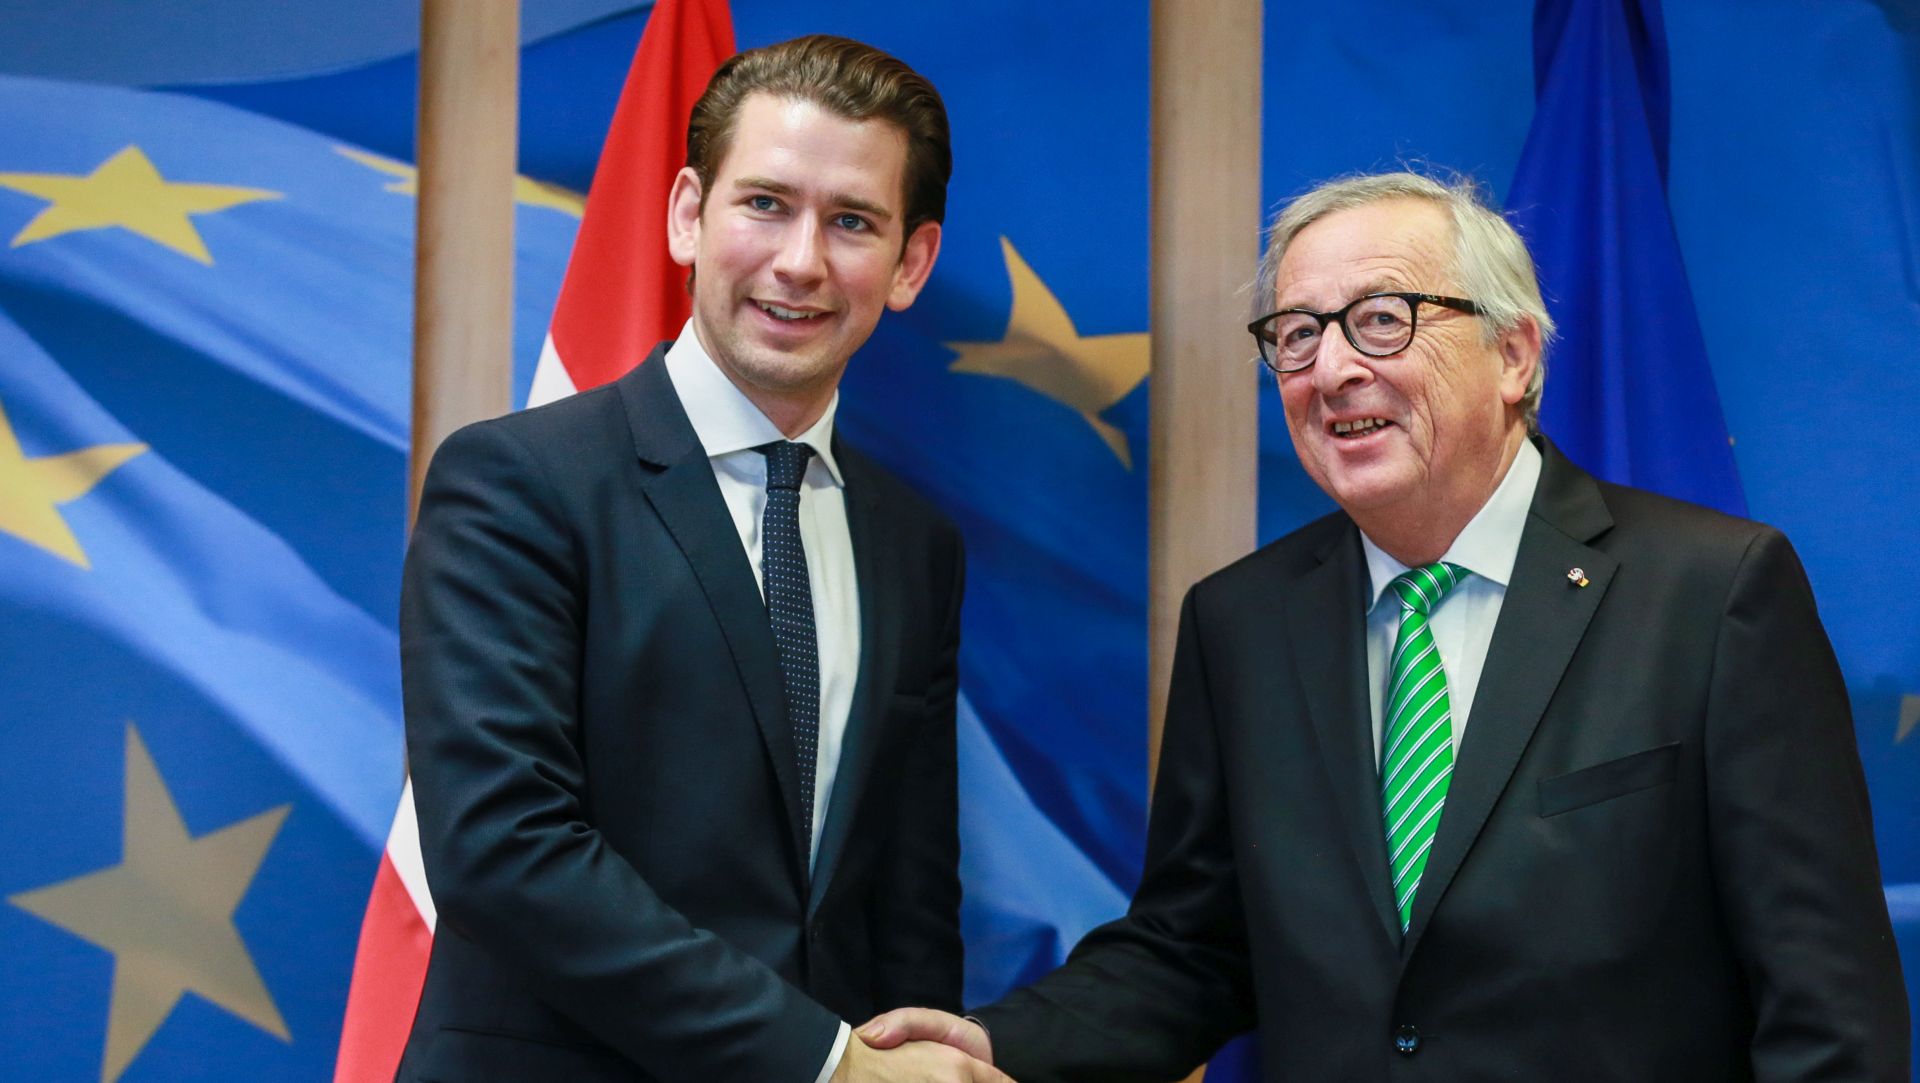 epa07170196 Austrian Chancellor Sebastian Kurz (L) is welcomed by the President of the European Commission Jean Claude Juncker ahead of a meeting at the European Commission in Brussels, Belgium, 16 November 2018.  EPA/STEPHANIE LECOCQ